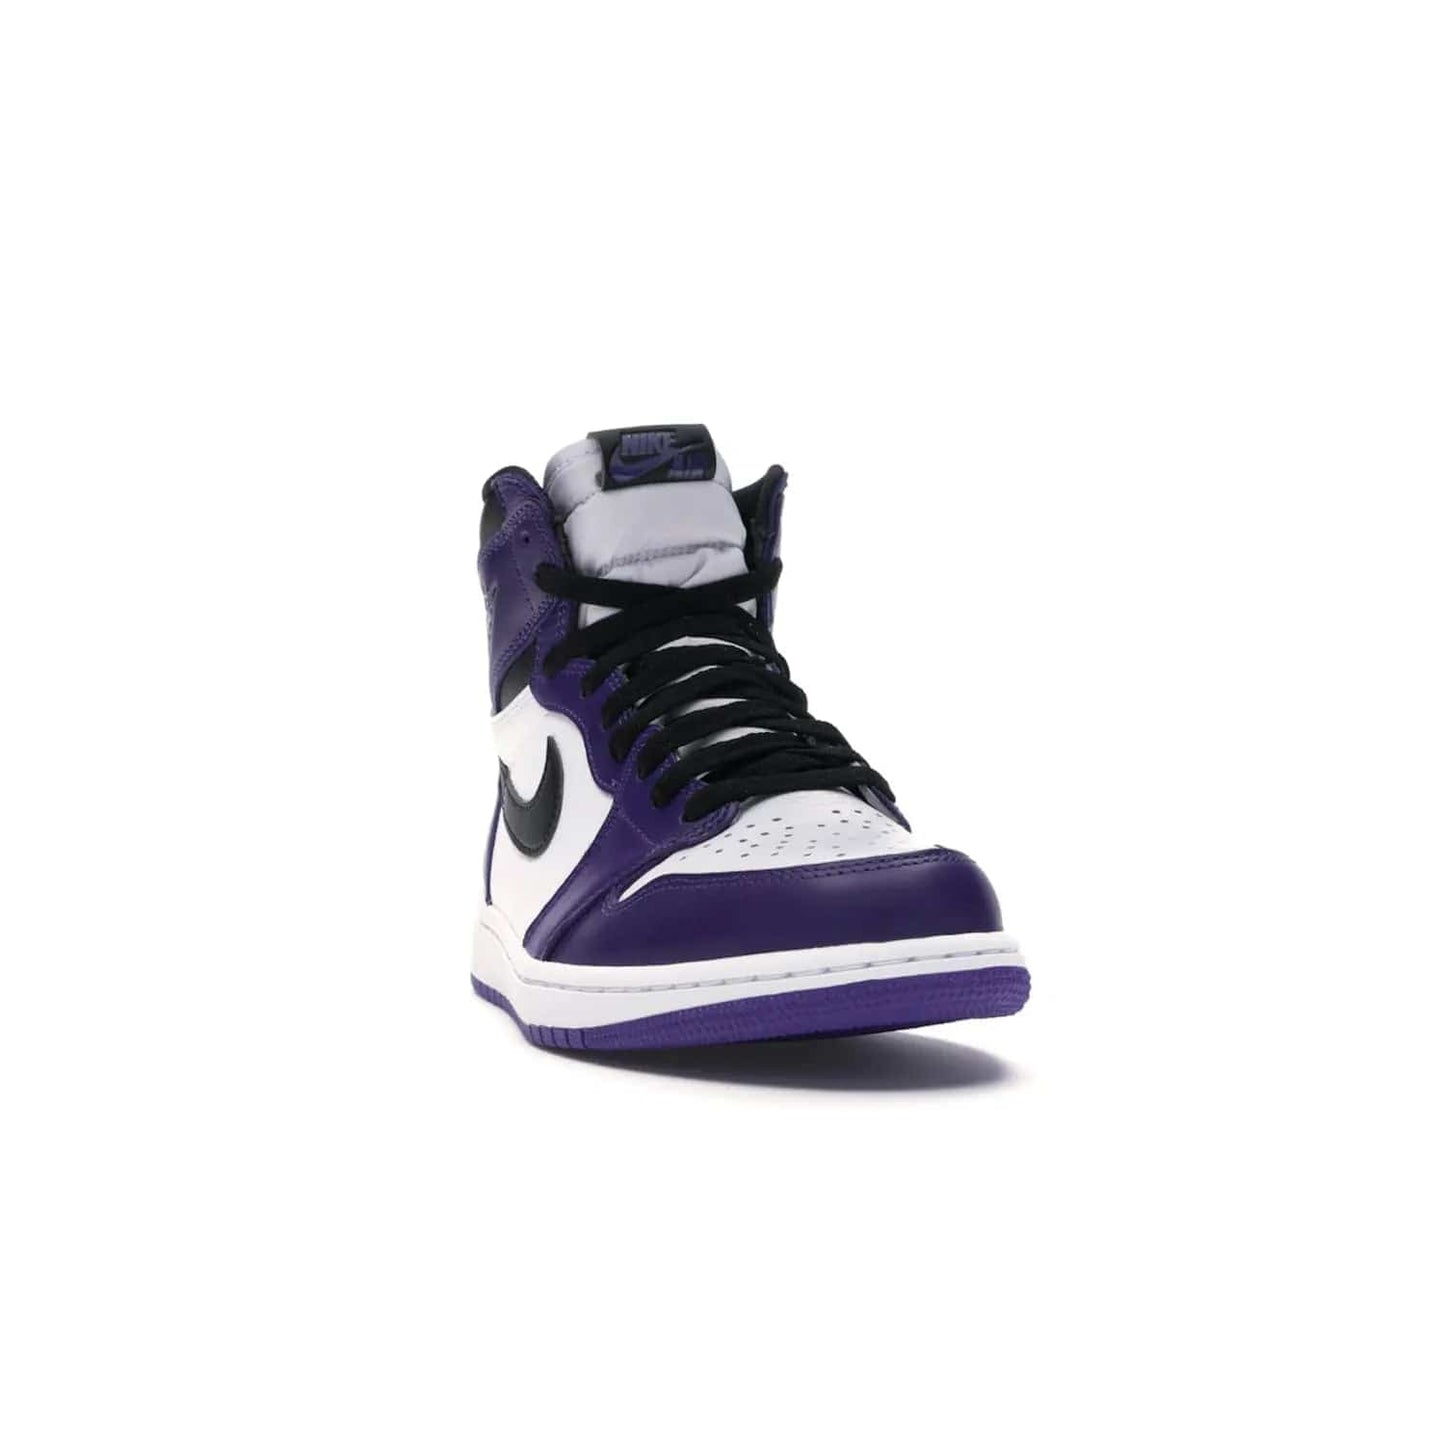 Jordan 1 Retro High Court Purple White - Image 8 - Only at www.BallersClubKickz.com - Grab the classic Jordan 1 Retro High Court Purple White and add major flavor to your collection. White leather upper with Court Purple overlays and Swoosh logo. White midsole and purple outsole. Get yours and rep your Jordan Brand.